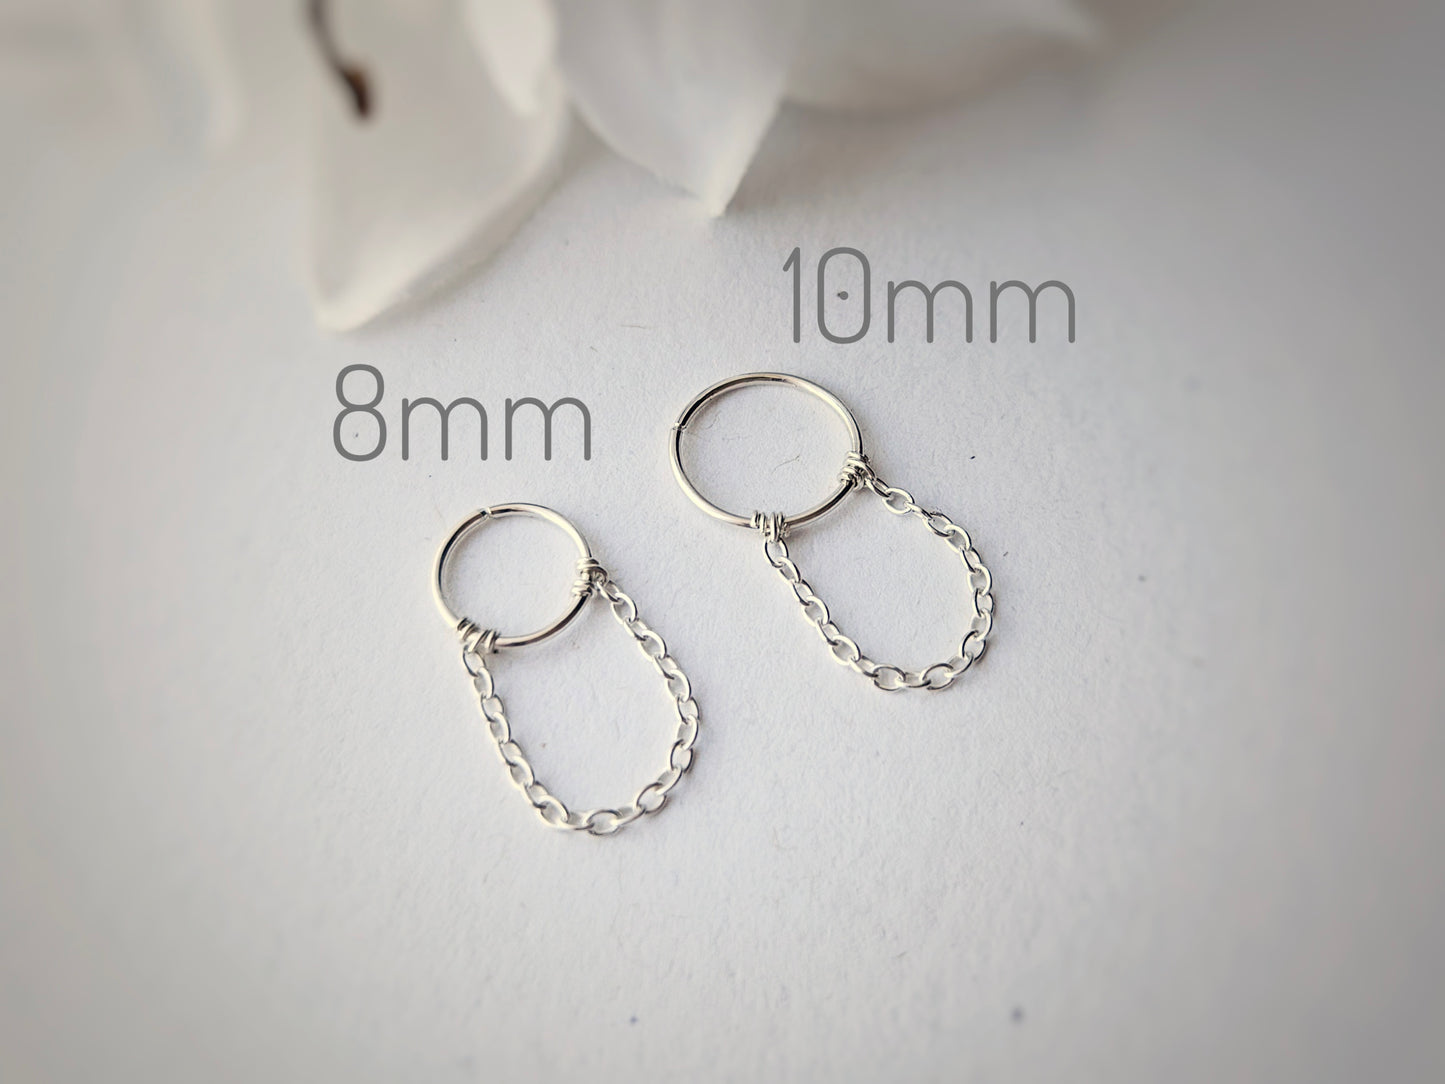 20g 18g Chain Cartilage Hoop Sterling Silver